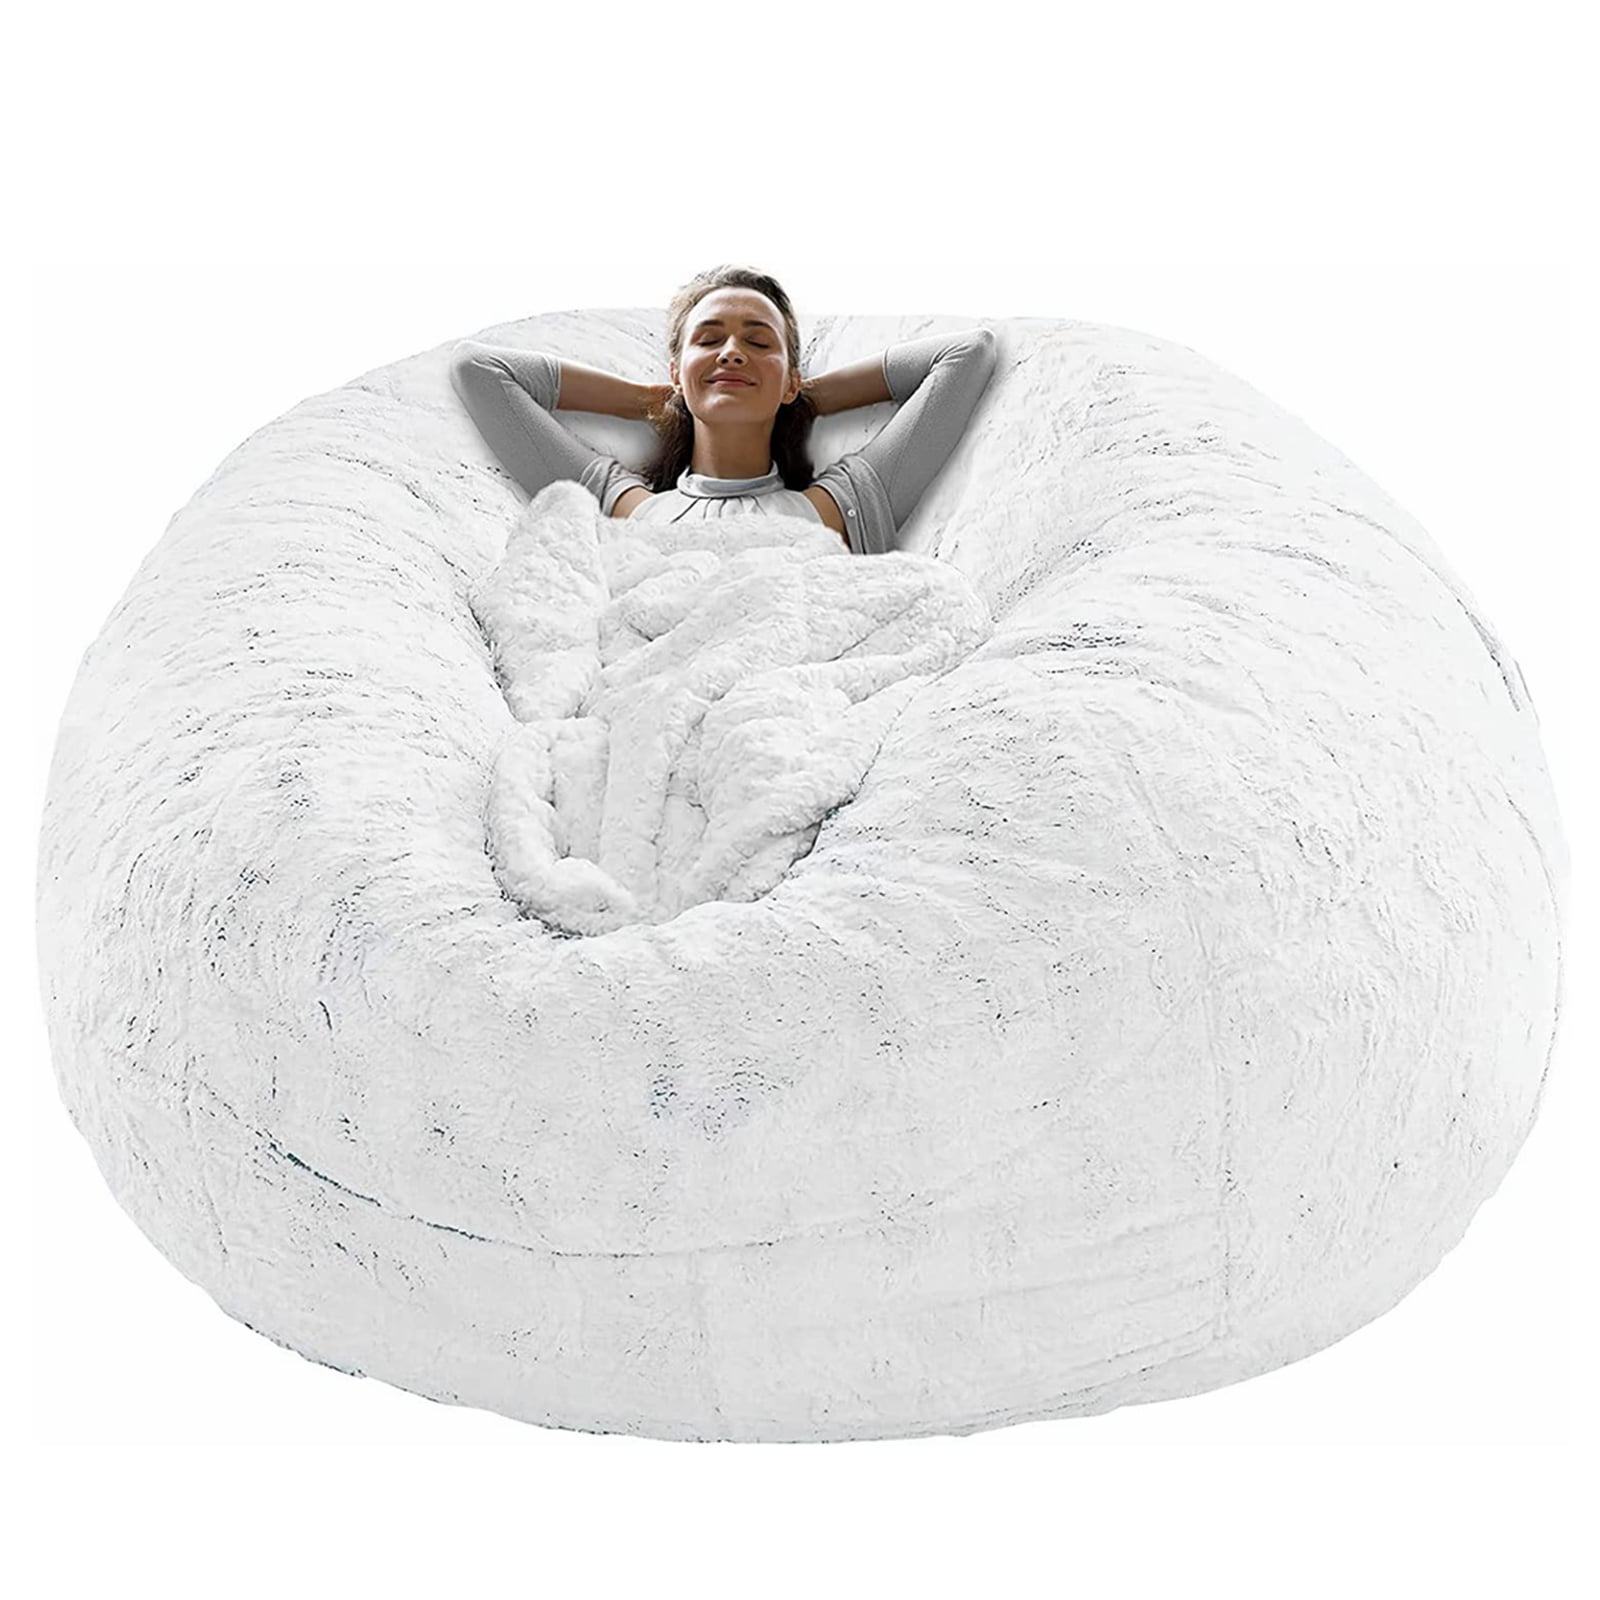 EKWQ 7ft Bean Bag Chair Cover, Living Room Furniture Big Round Soft Fluffy(Only Cover, No Filler) Faux Fur Beanbag Lazy Sofa Bed Cover 183cm Giant